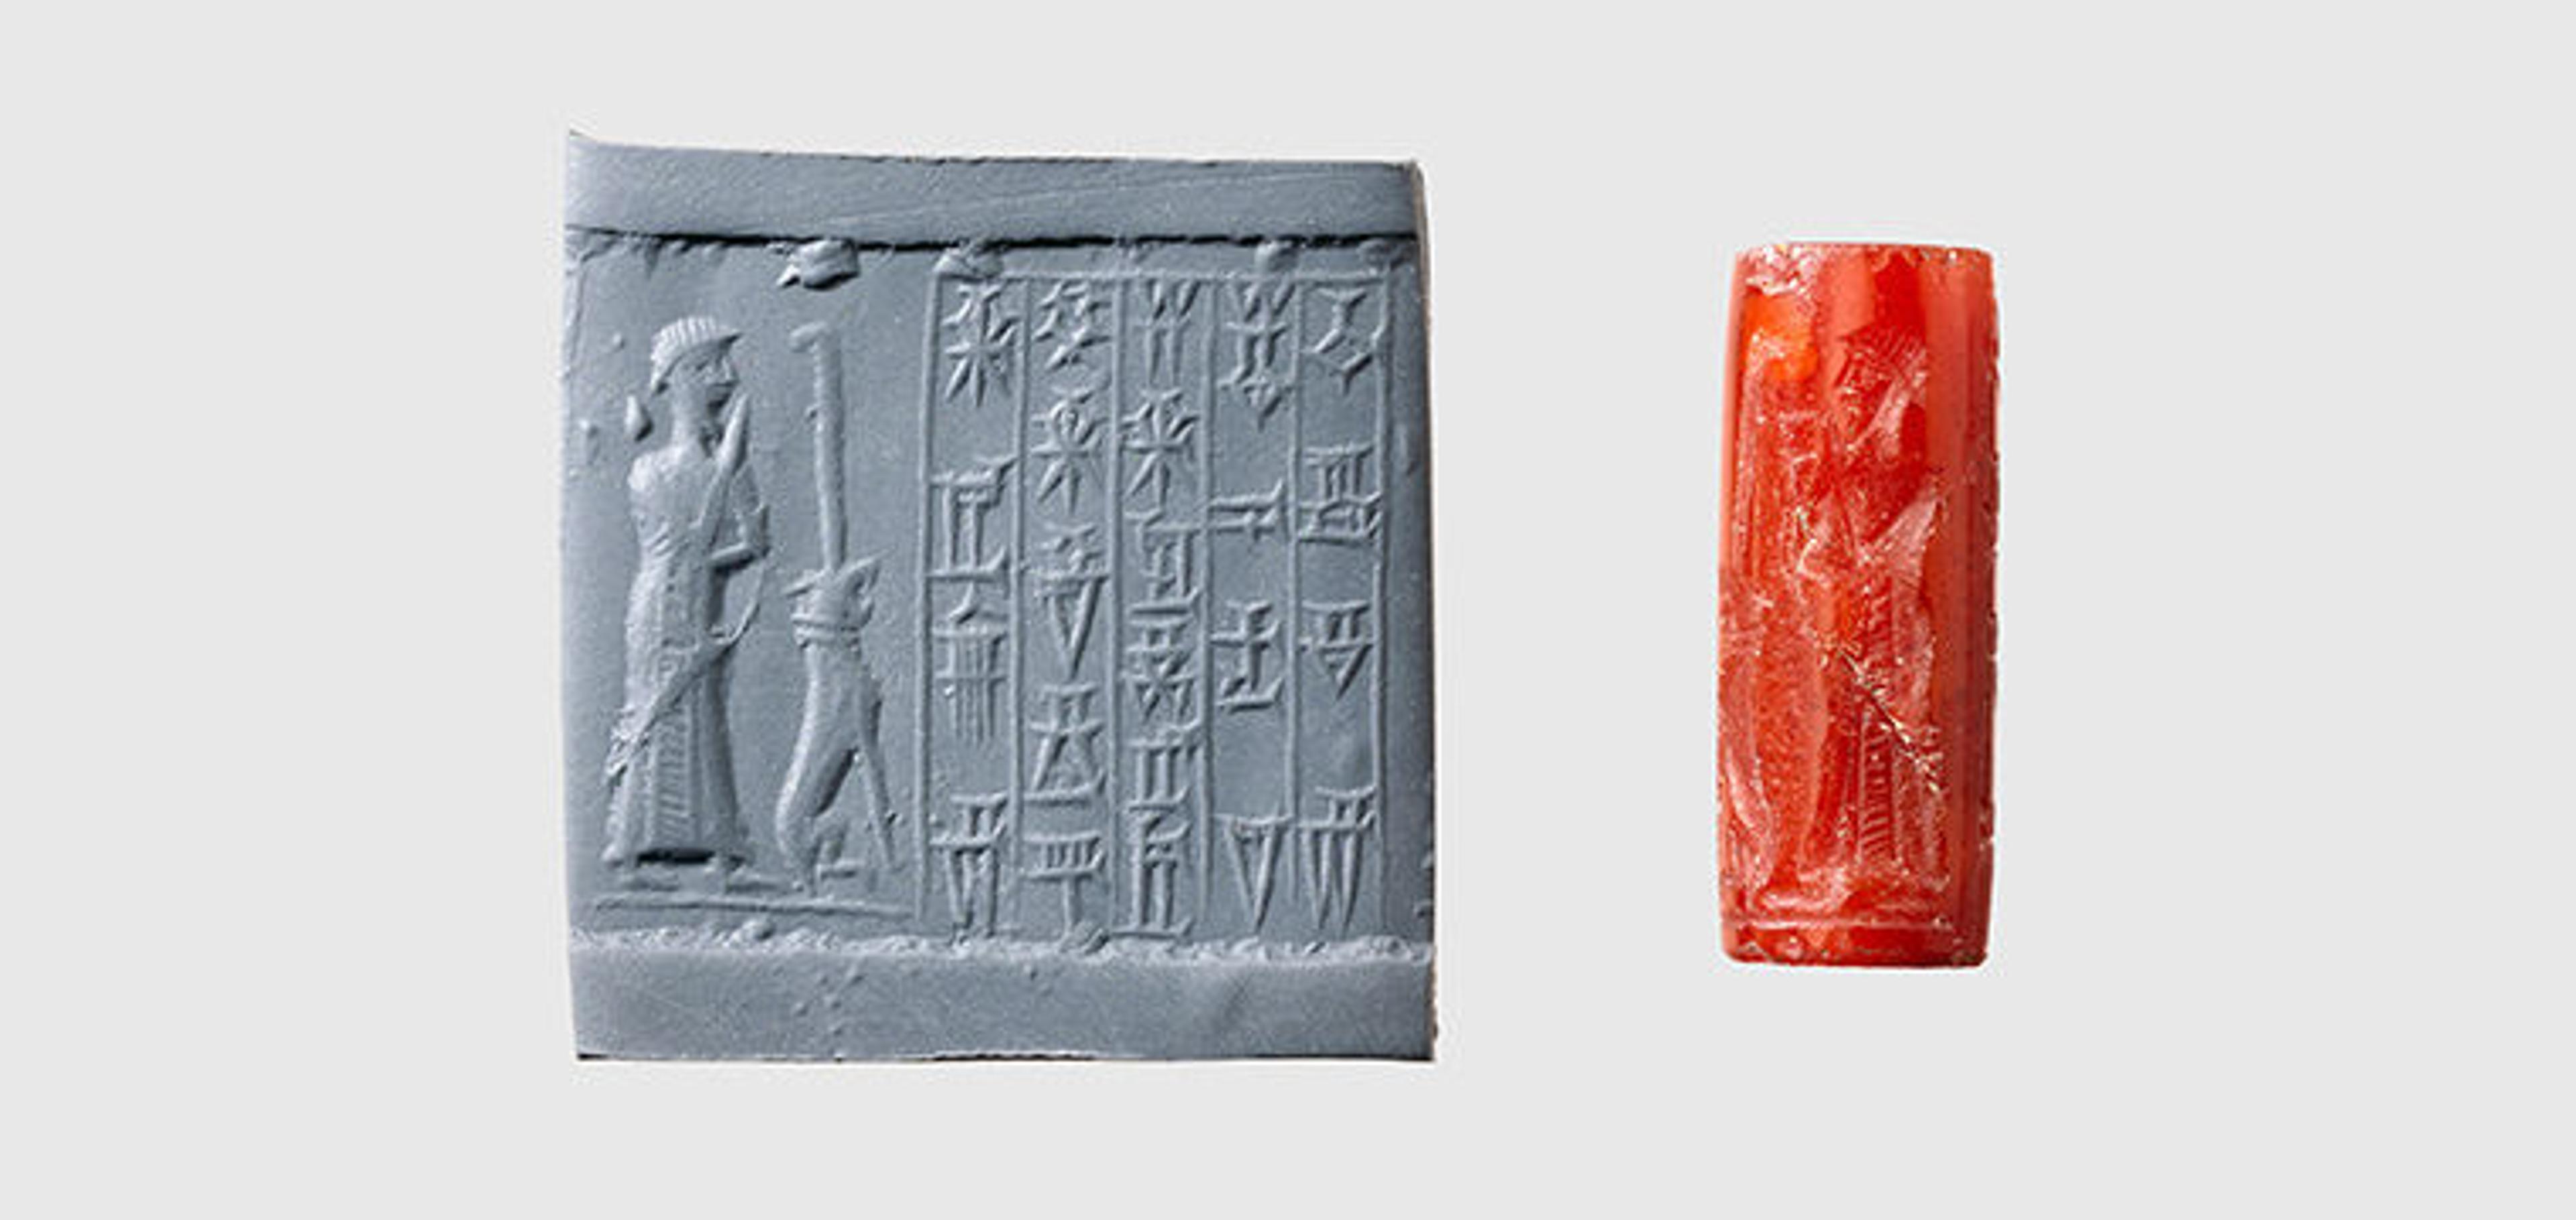 A red cylinder seal made from carnelian next to a rectangular piece of clay on which the seal was rolled. The impression on the clay shows a man, dog and writing. 